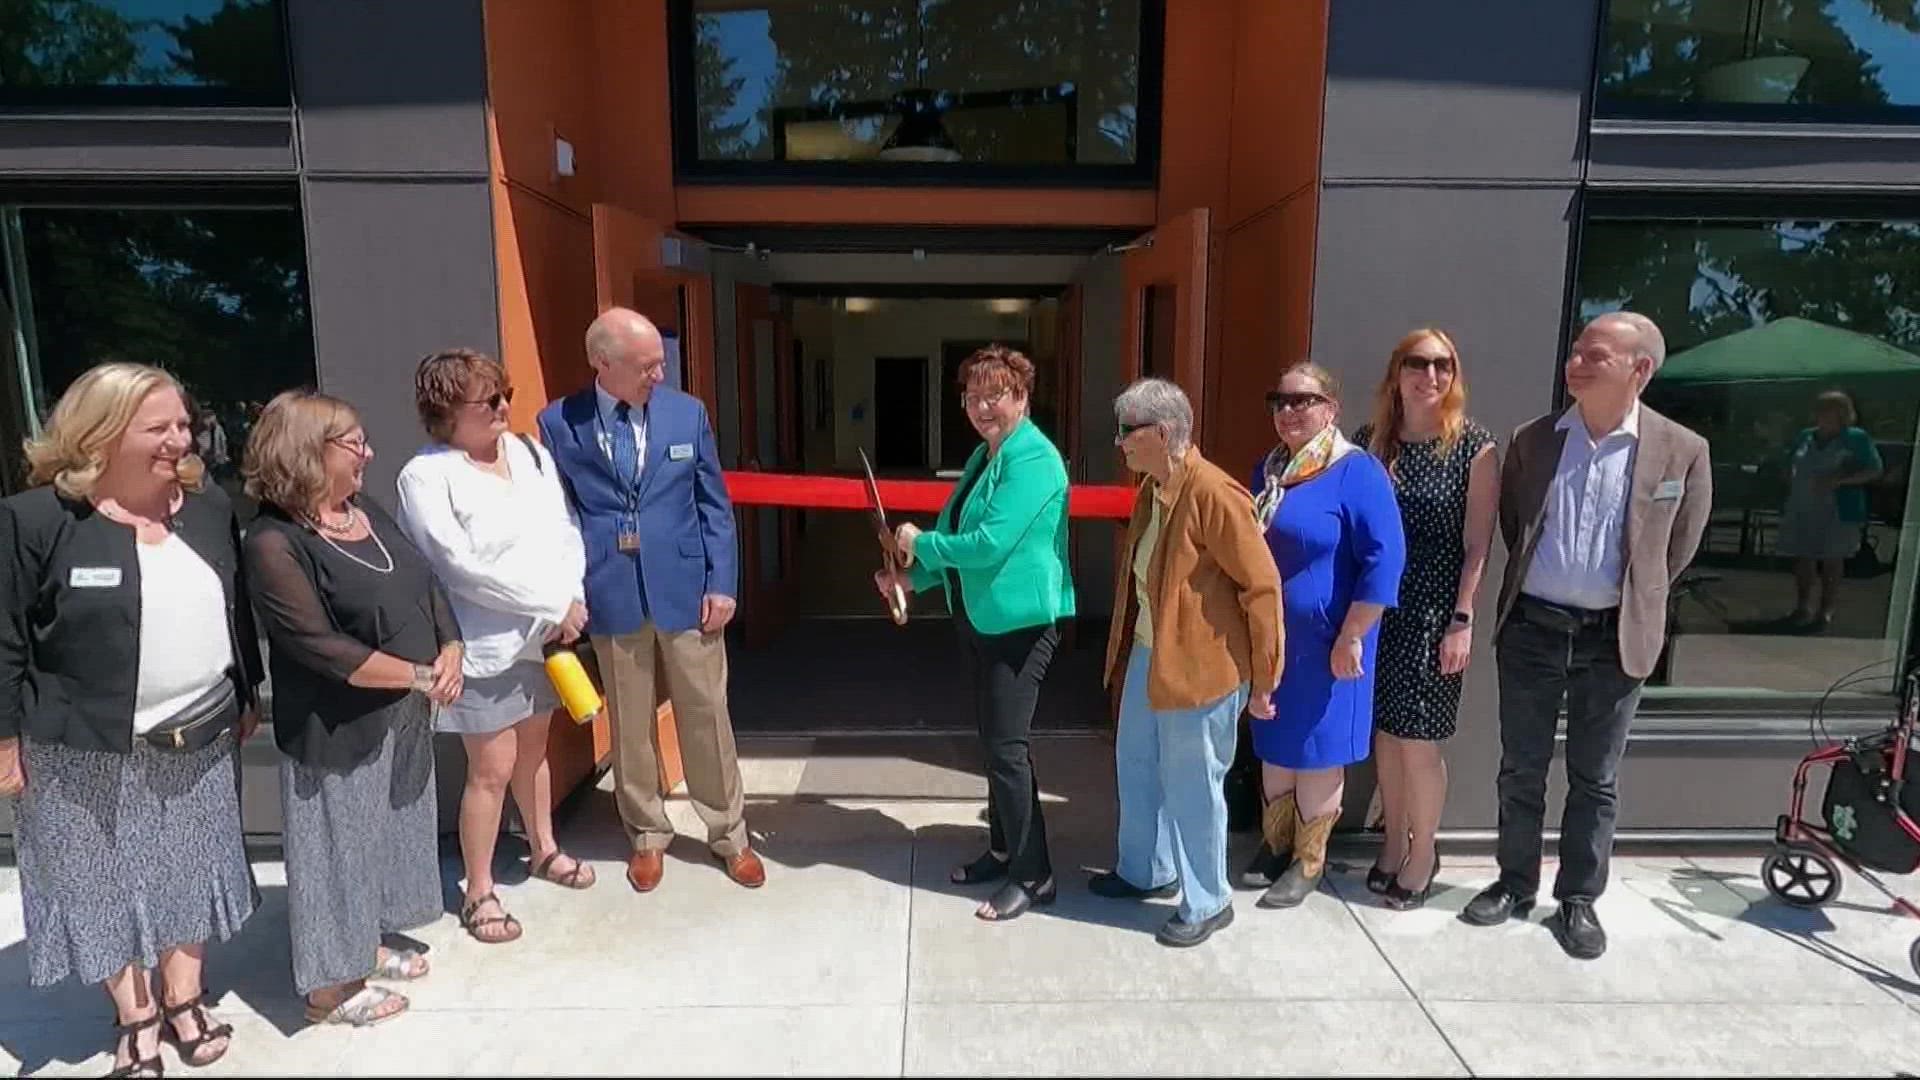 A new affordable housing option for older adults opened this week in Gladstone. It will offer housing to those who make less than 30% of the area's median income.